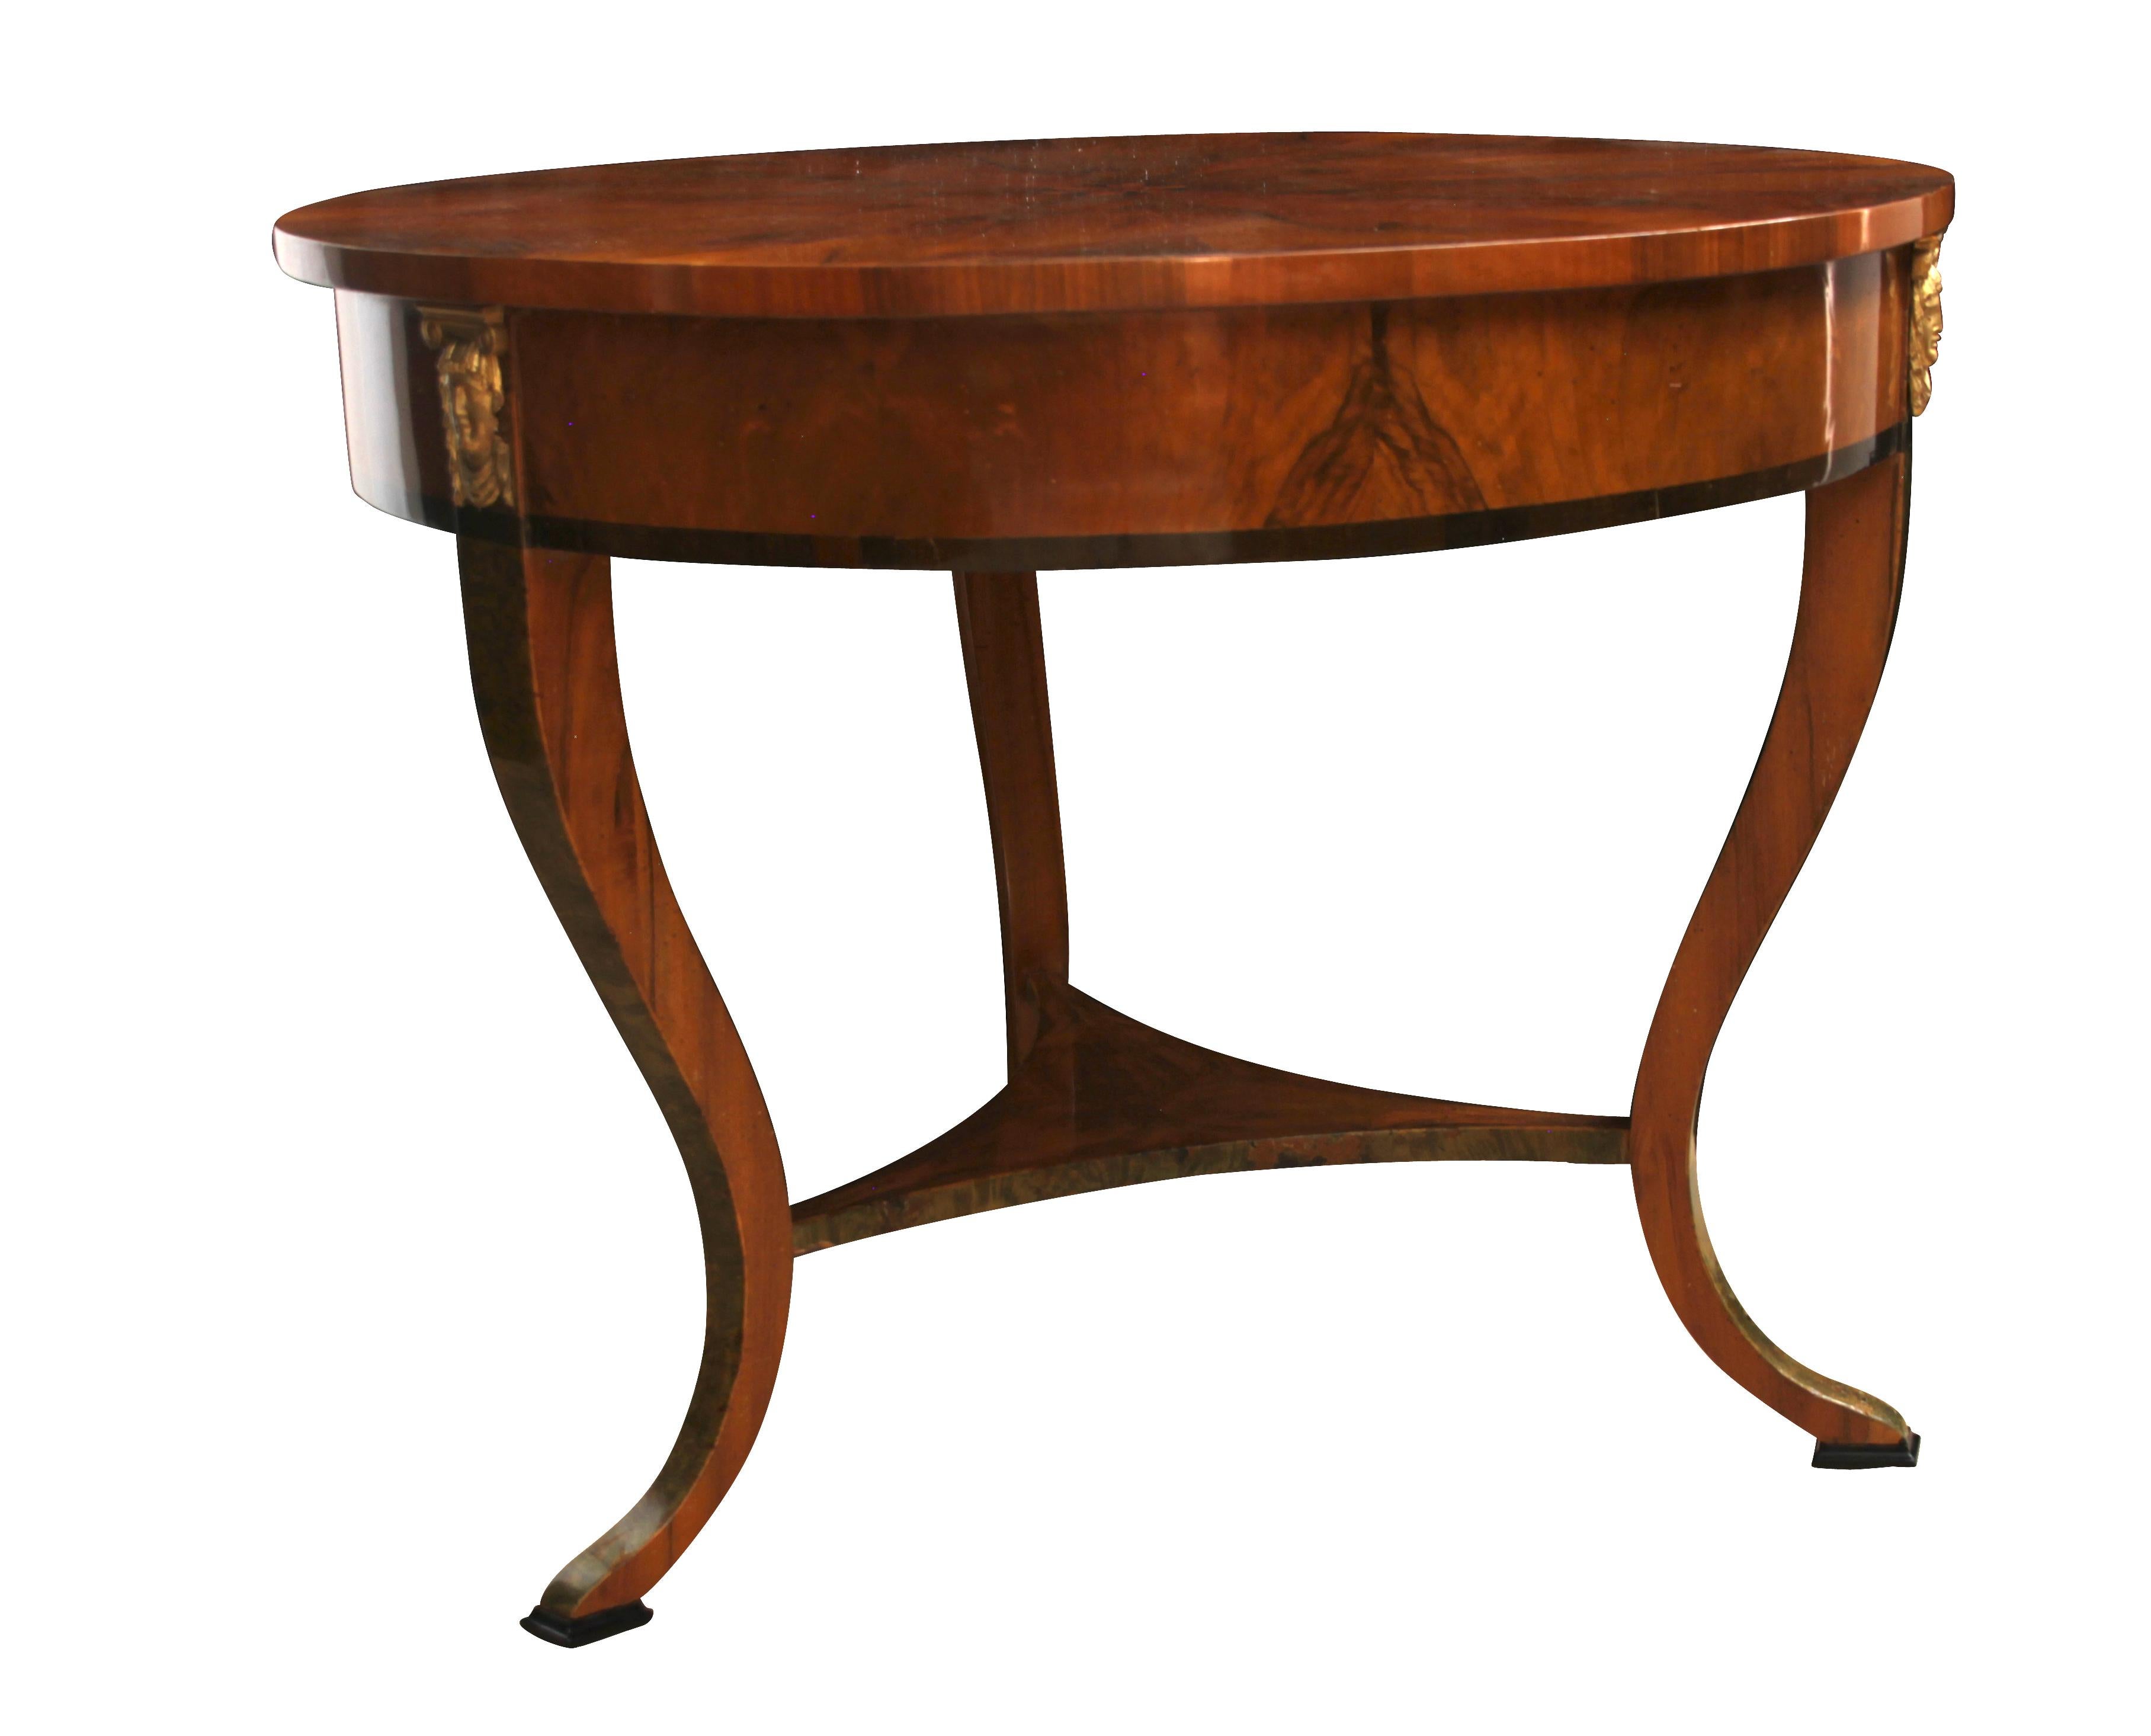 Wonderful round Empire table with three Caryatide heads at the sides and a beautiful star-shaped walnut veneer. The legs are very elegantly curved and have a middle tray in between. The table has several ebony inlays
and a green-colored birch root